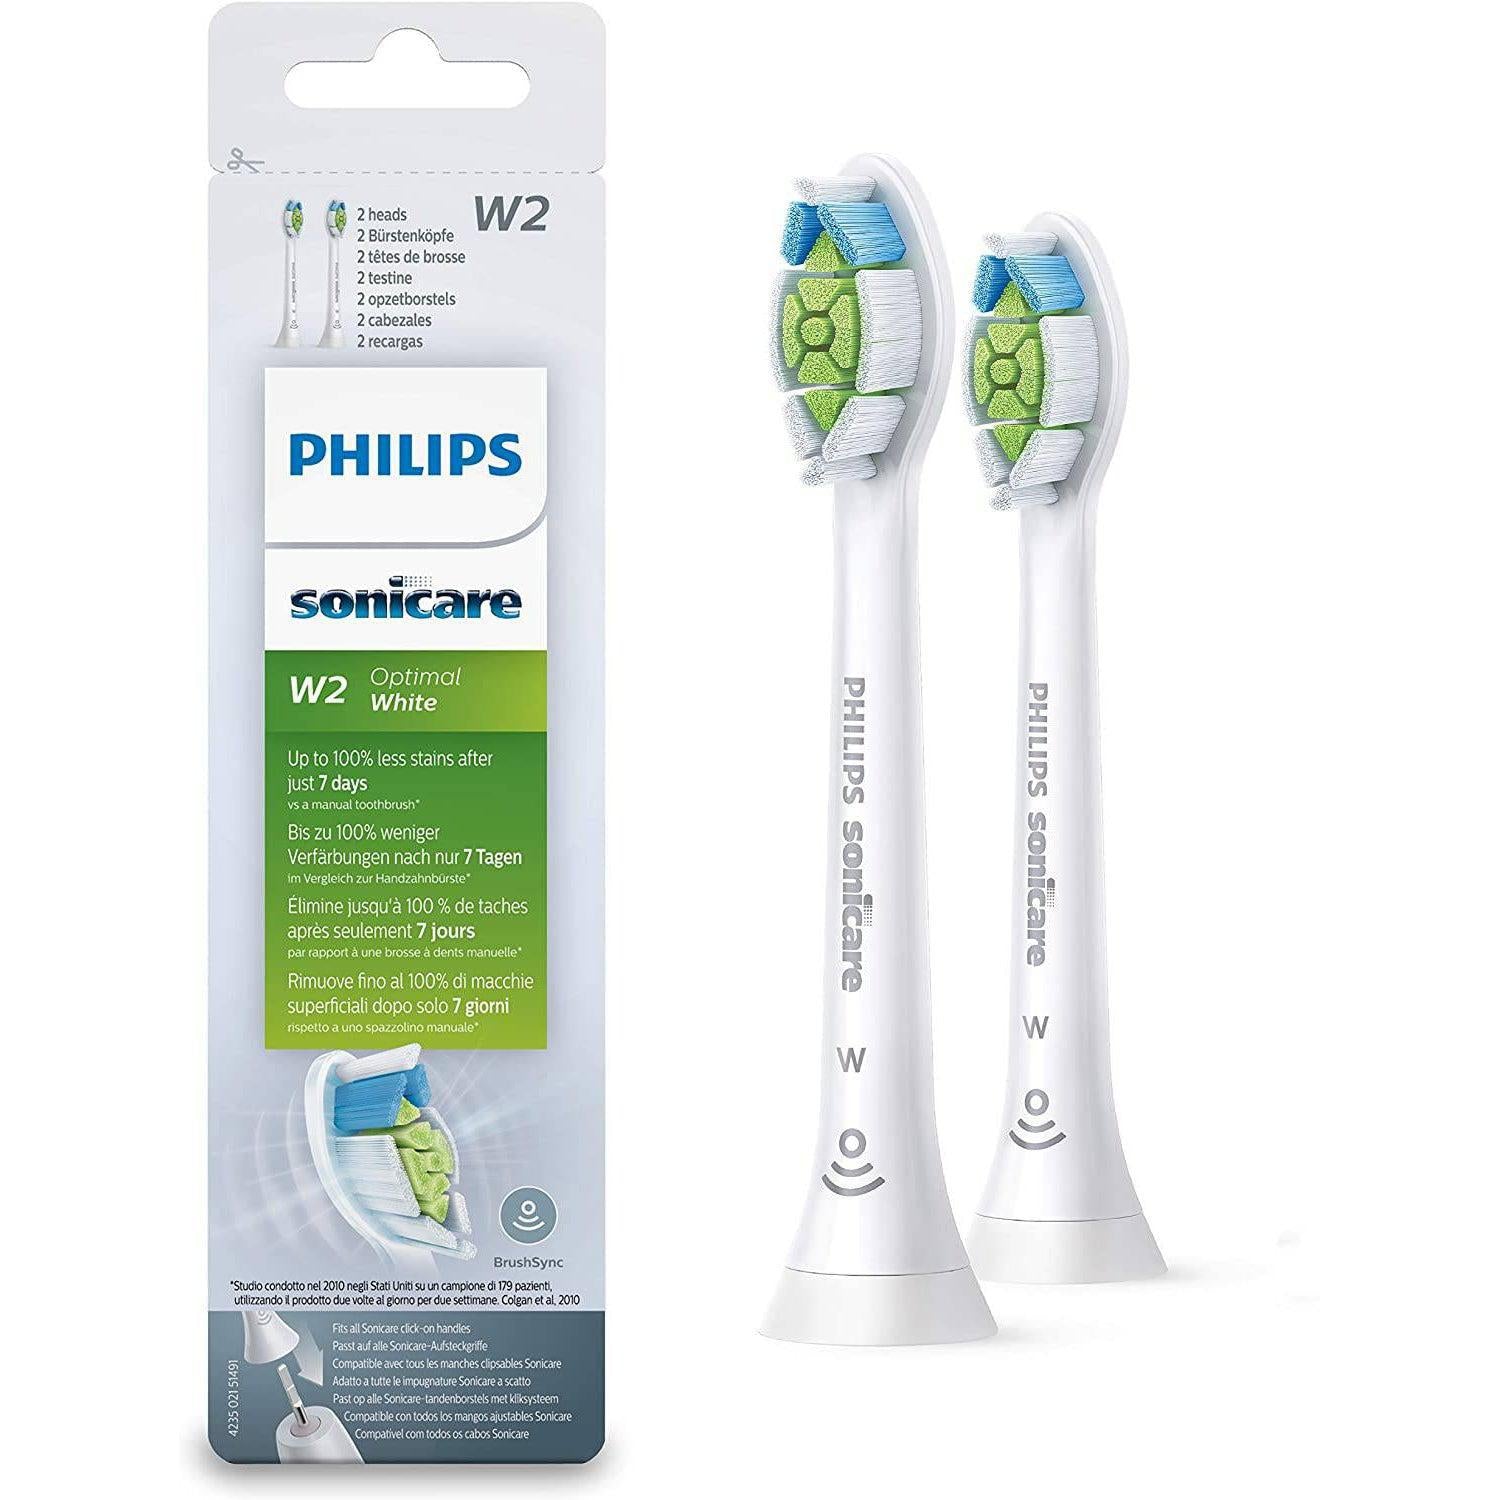 Philips HX6062/10 Sonicare Optimal White Toothbrush Heads (White) Pack of 2 - Healthxpress.ie